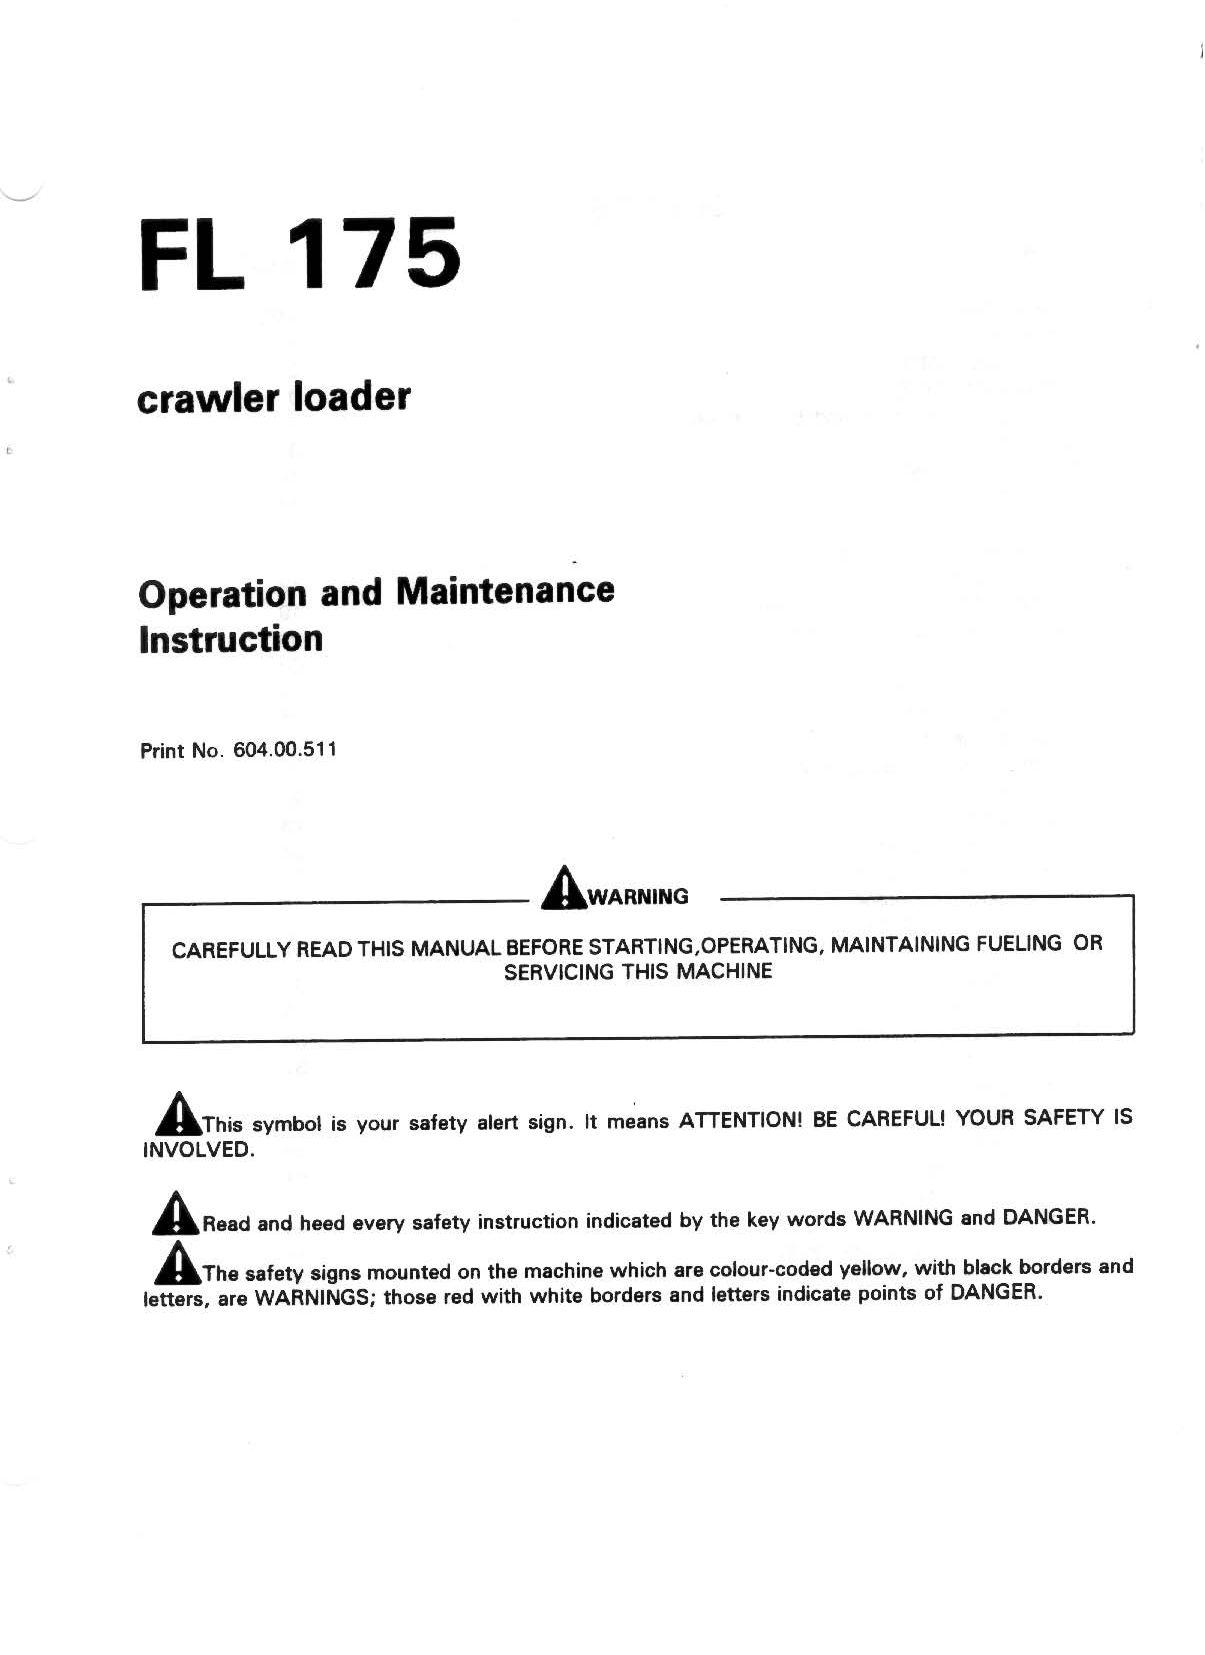 Fiat Allis FL175 crawler loader operation and maintenance construction manual Preview image 2